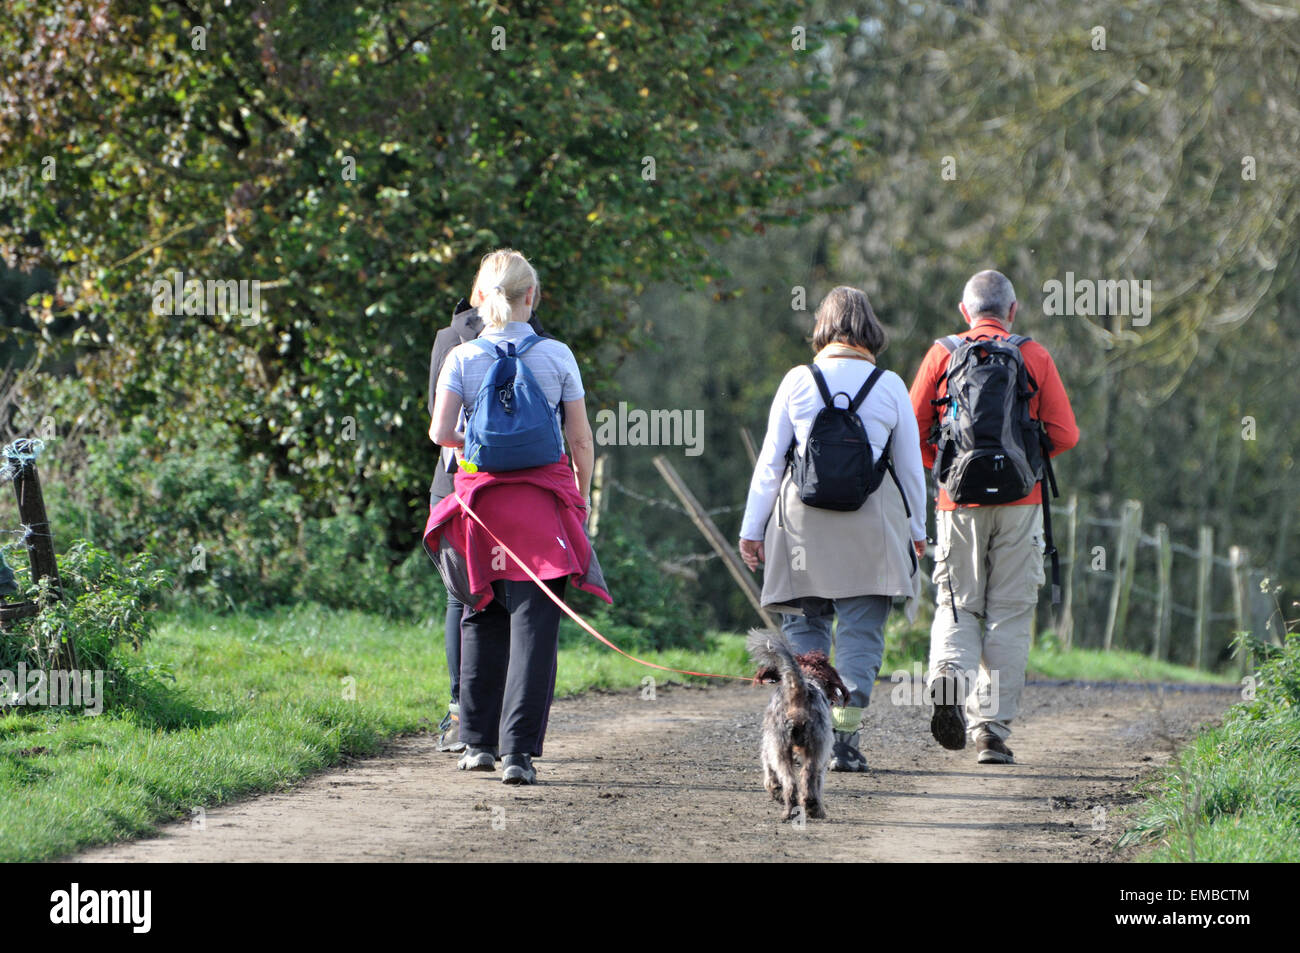 A family with a dog walking in a footpath in the countryside. A blond teenager girl with her mother and father hiking for their health. Stock Photo